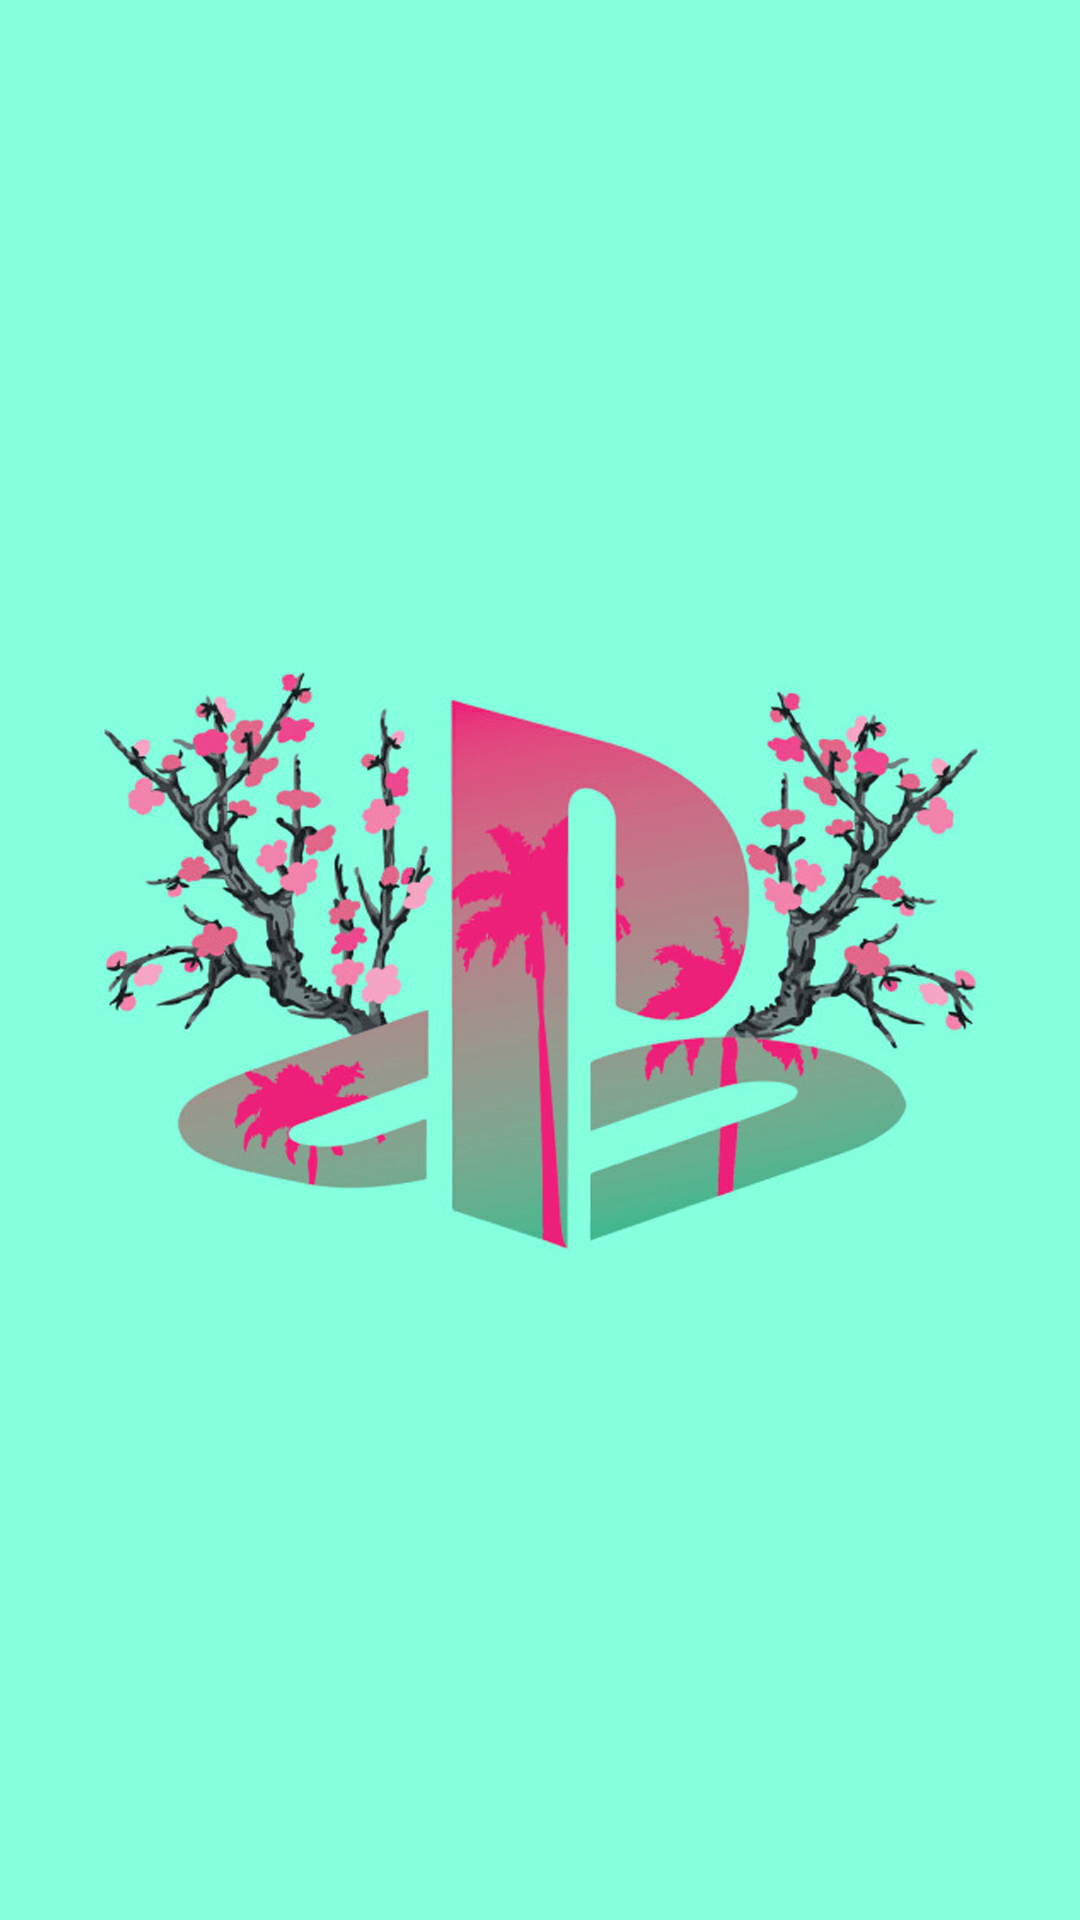 Playstation photo aesthetic wallpapers